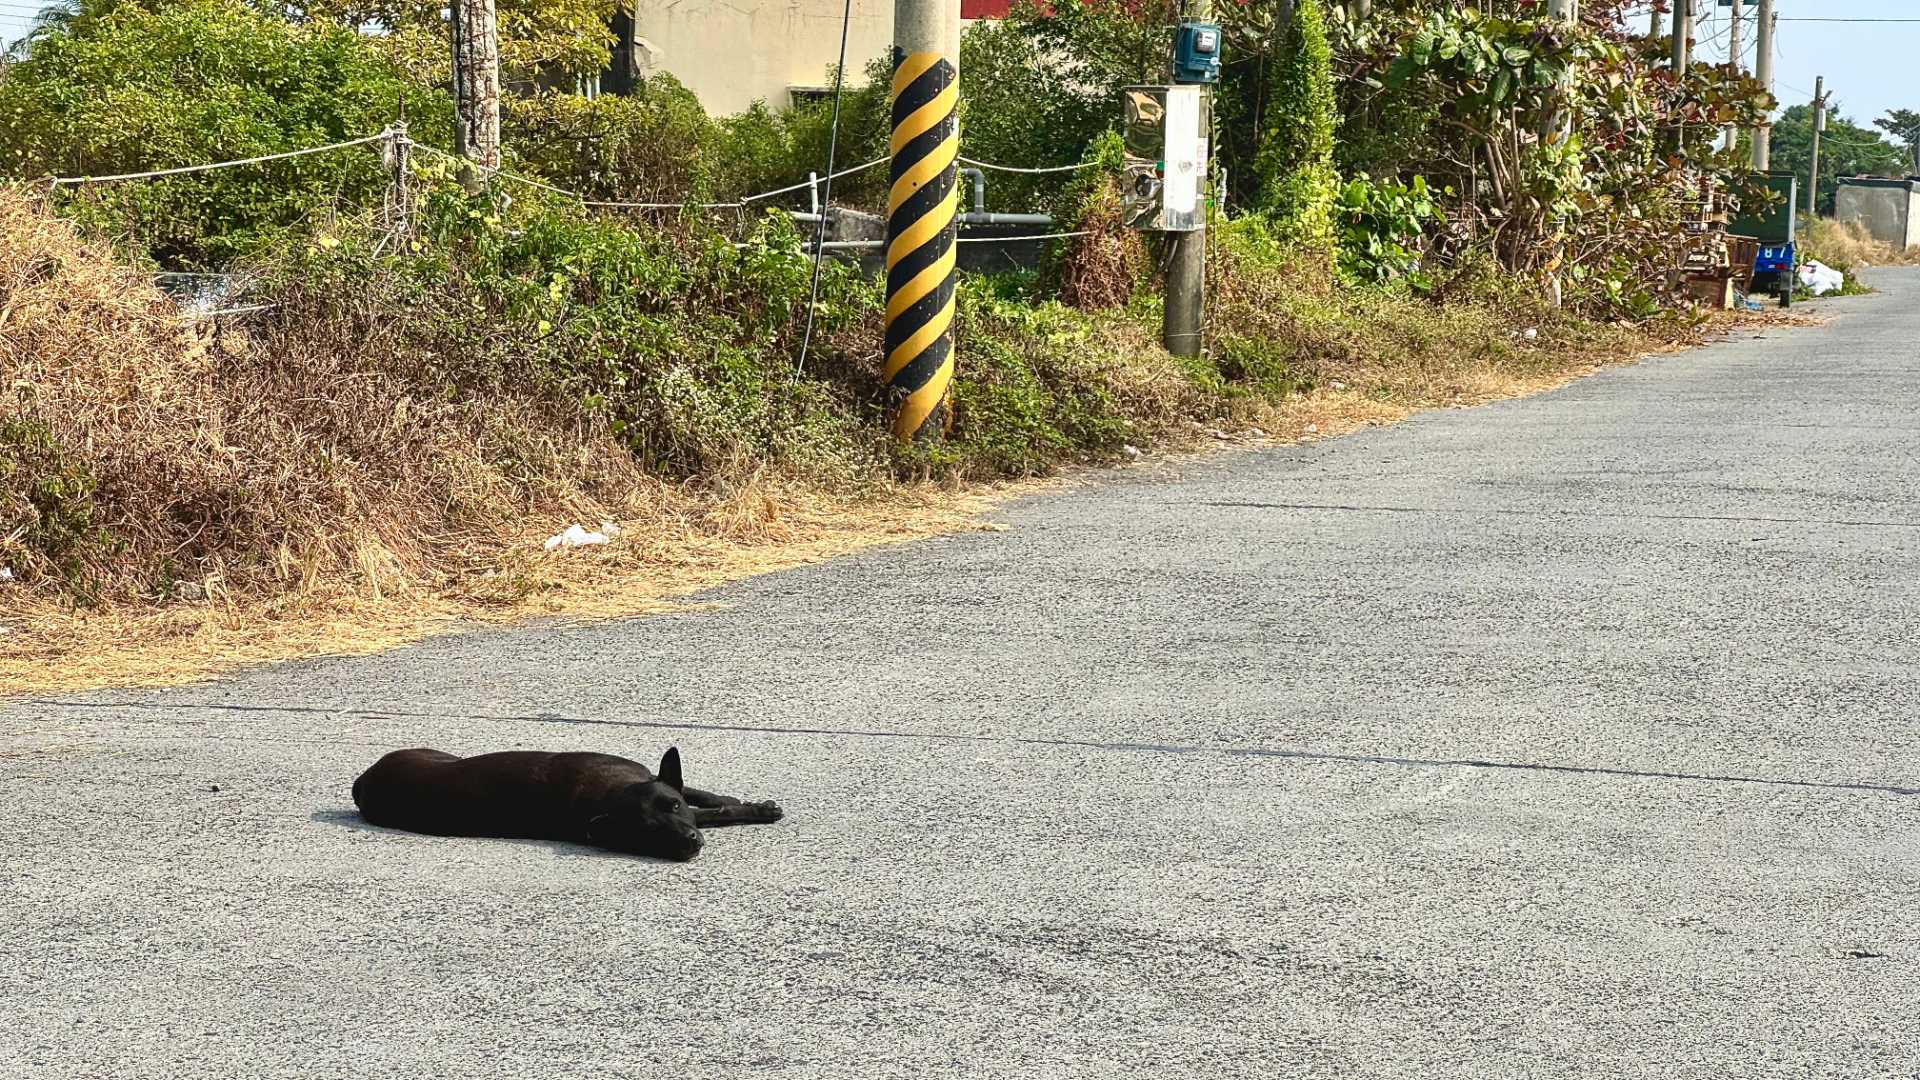 A stray dog laying on a concrete country road, looking at the camera.